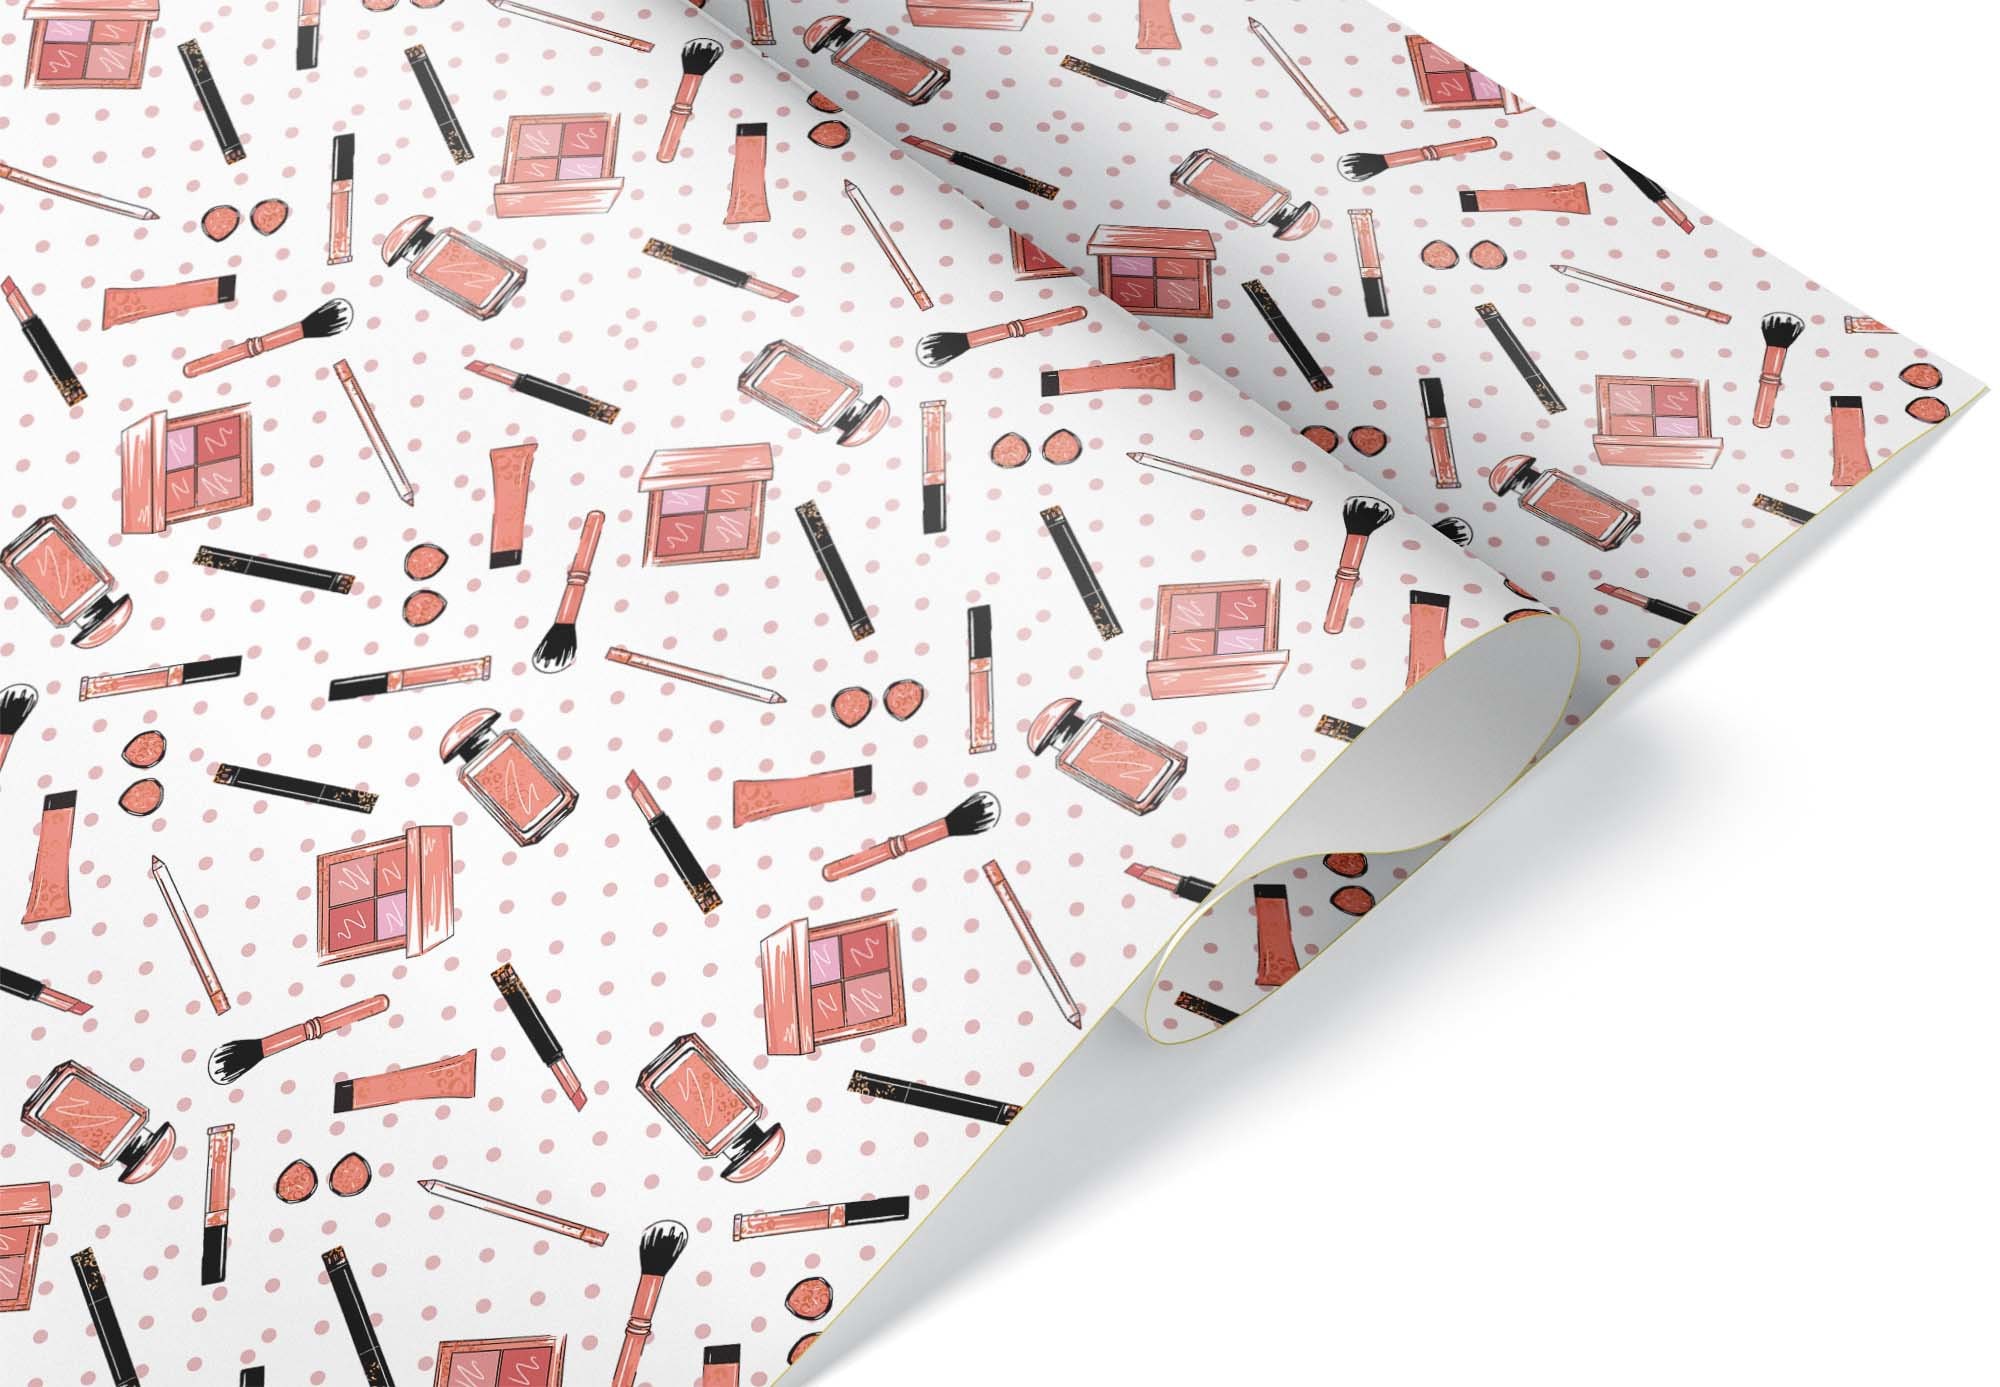 Katya - Metal Wrapping paper sheets – dragqueenmerch